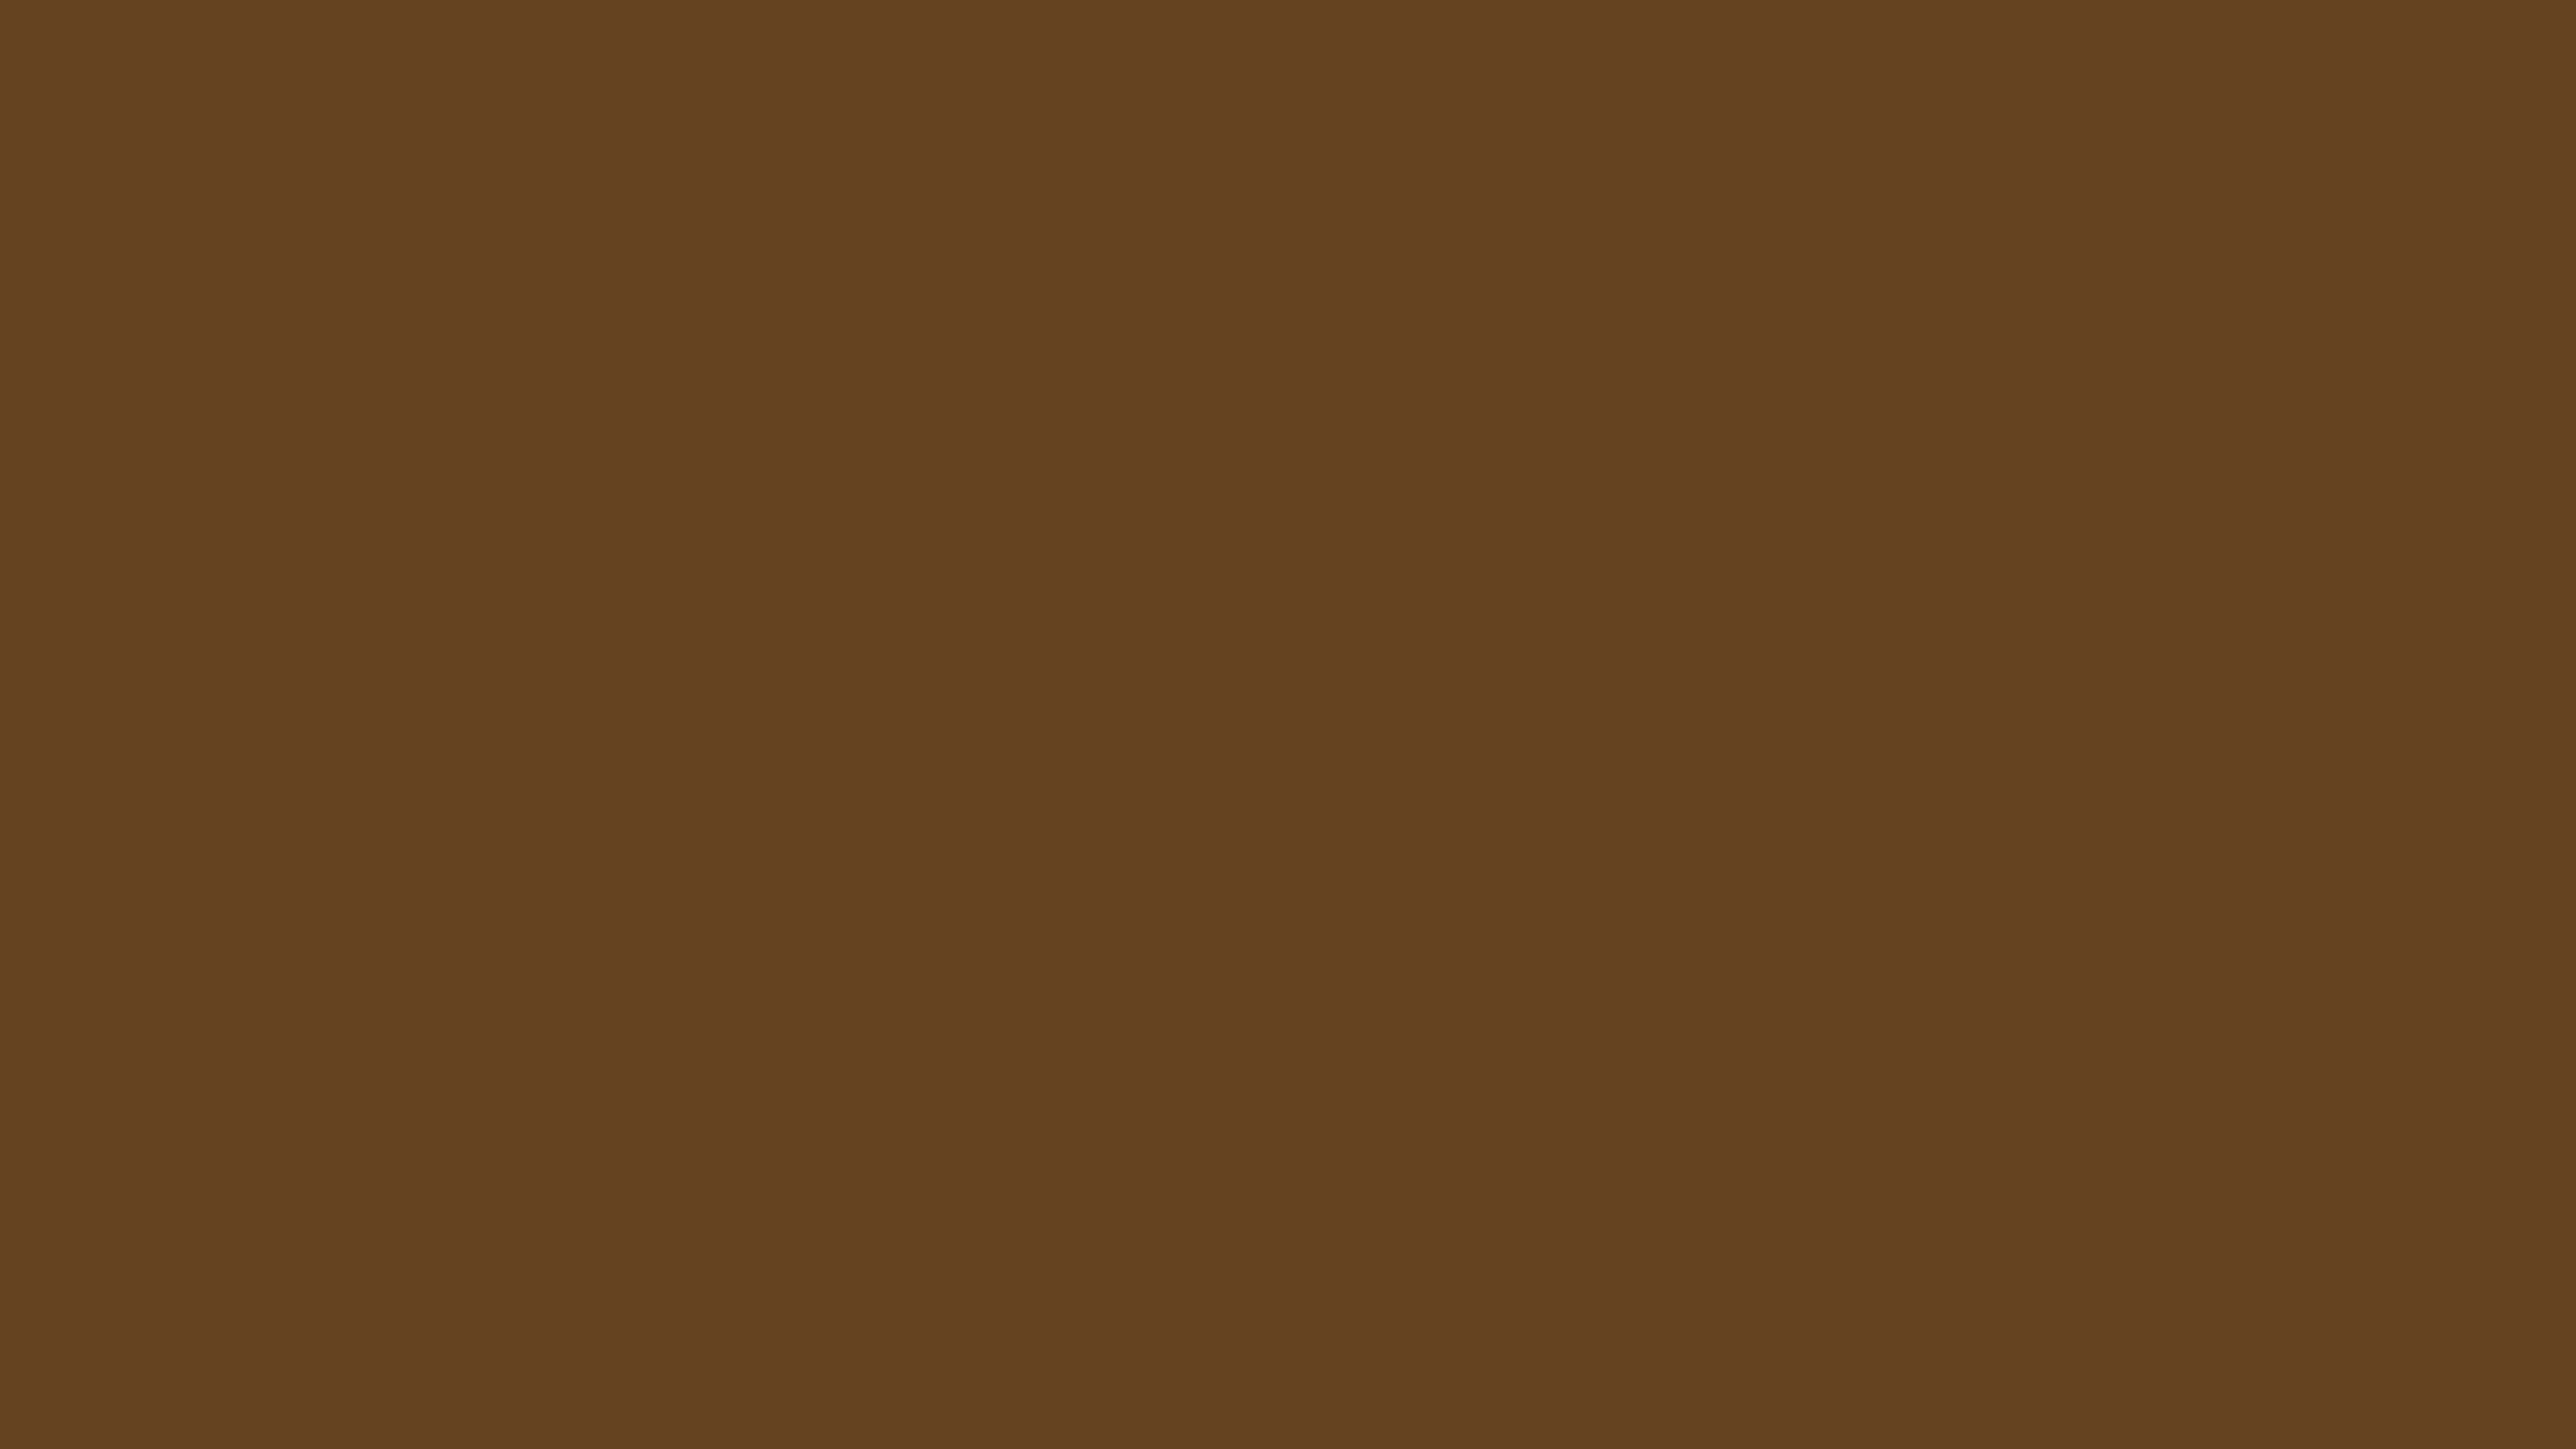 7680x4320 Otter Brown Solid Color Background